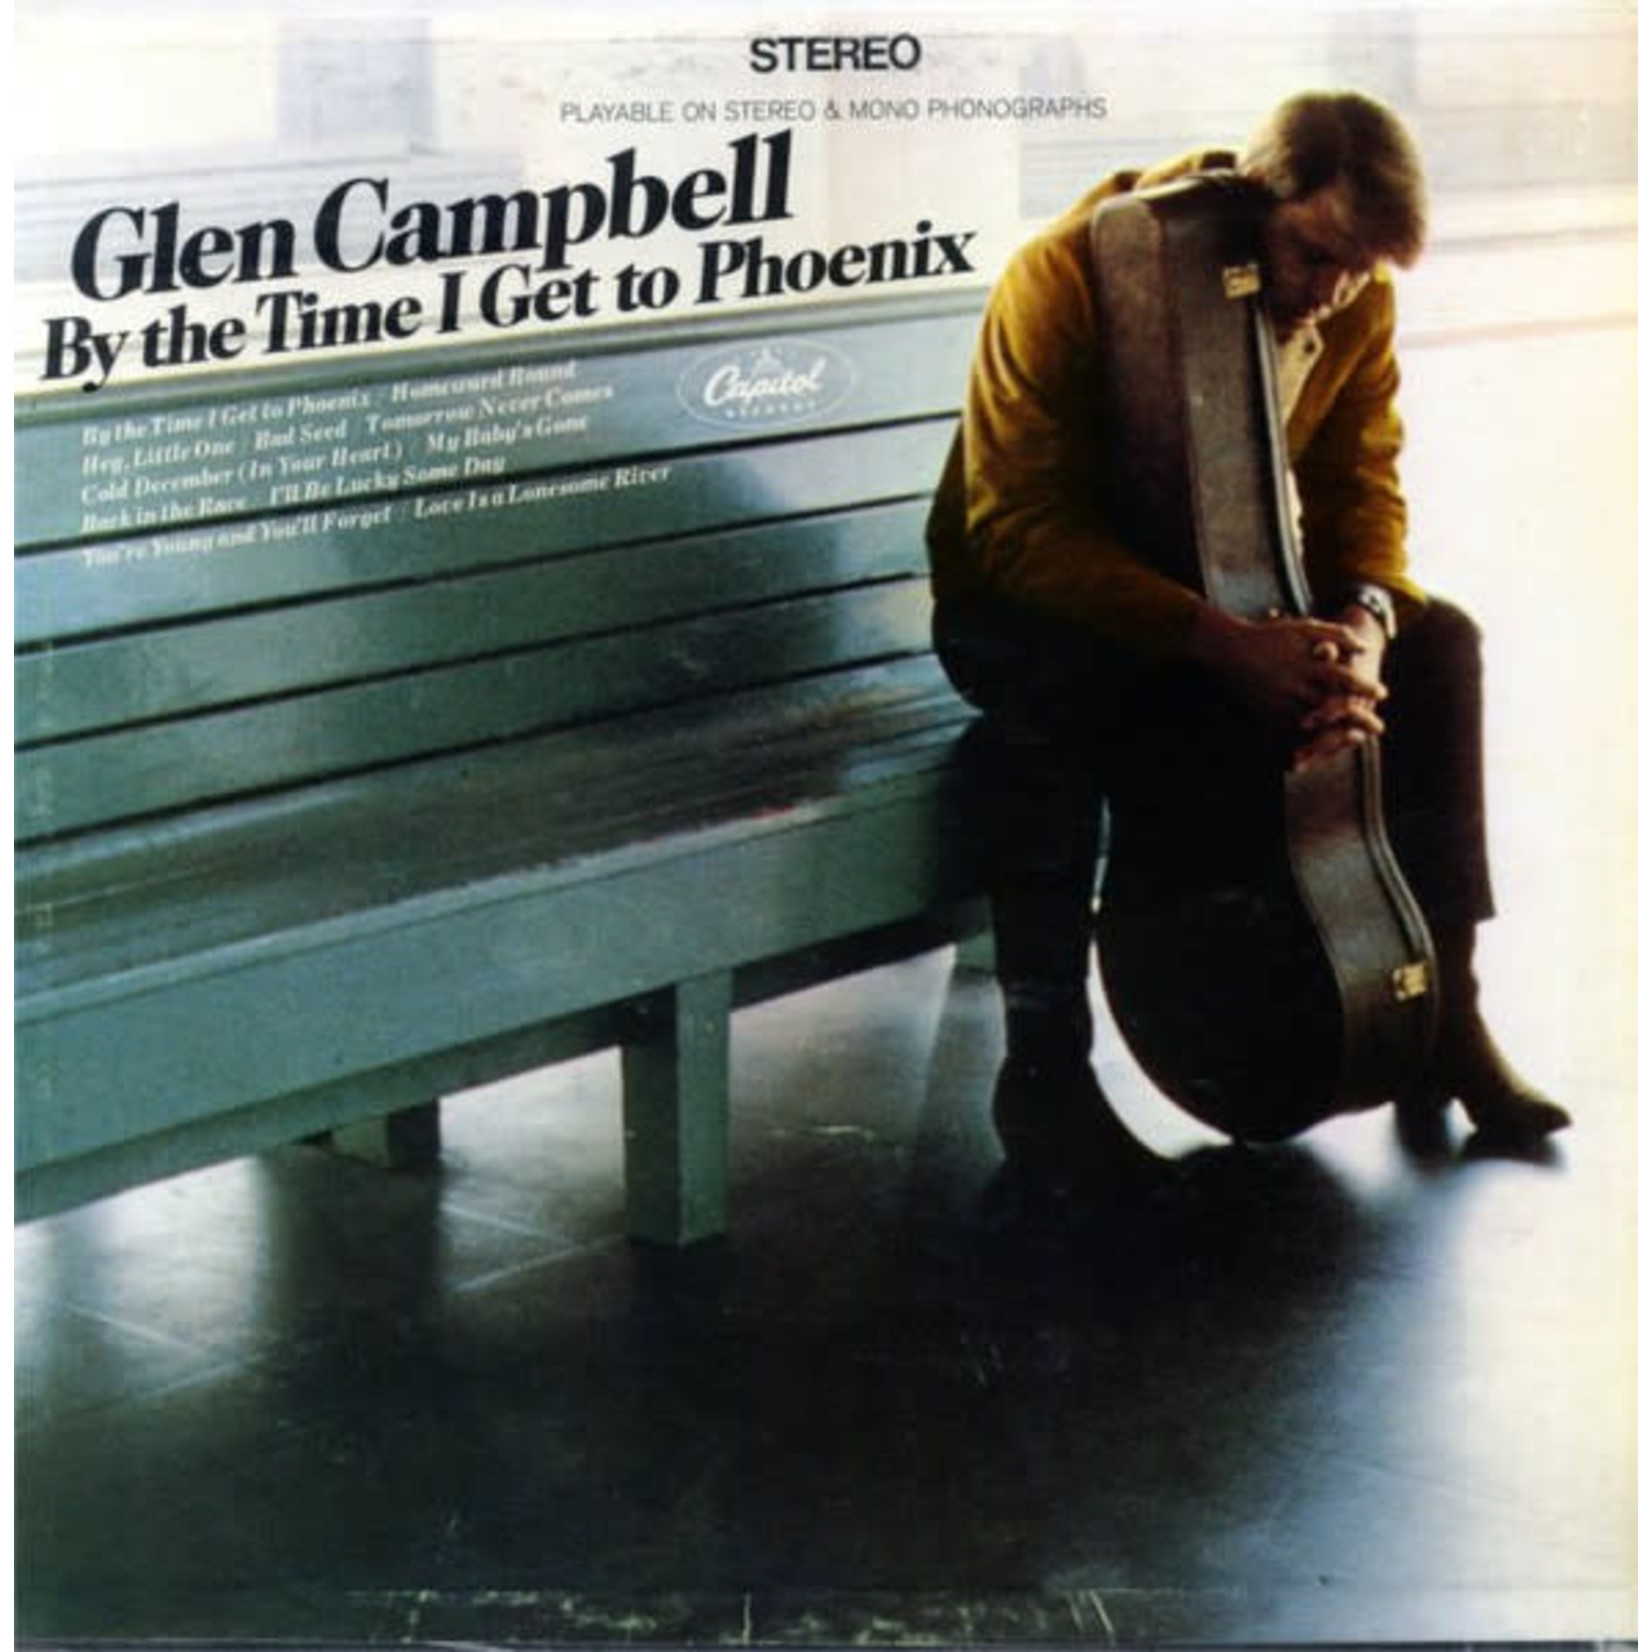 Glen Campbell Glen Campbell – By The Time I Get To Phoenix (G, 1967, LP, Stereo, Capitol Records – ST 2851, Canada)